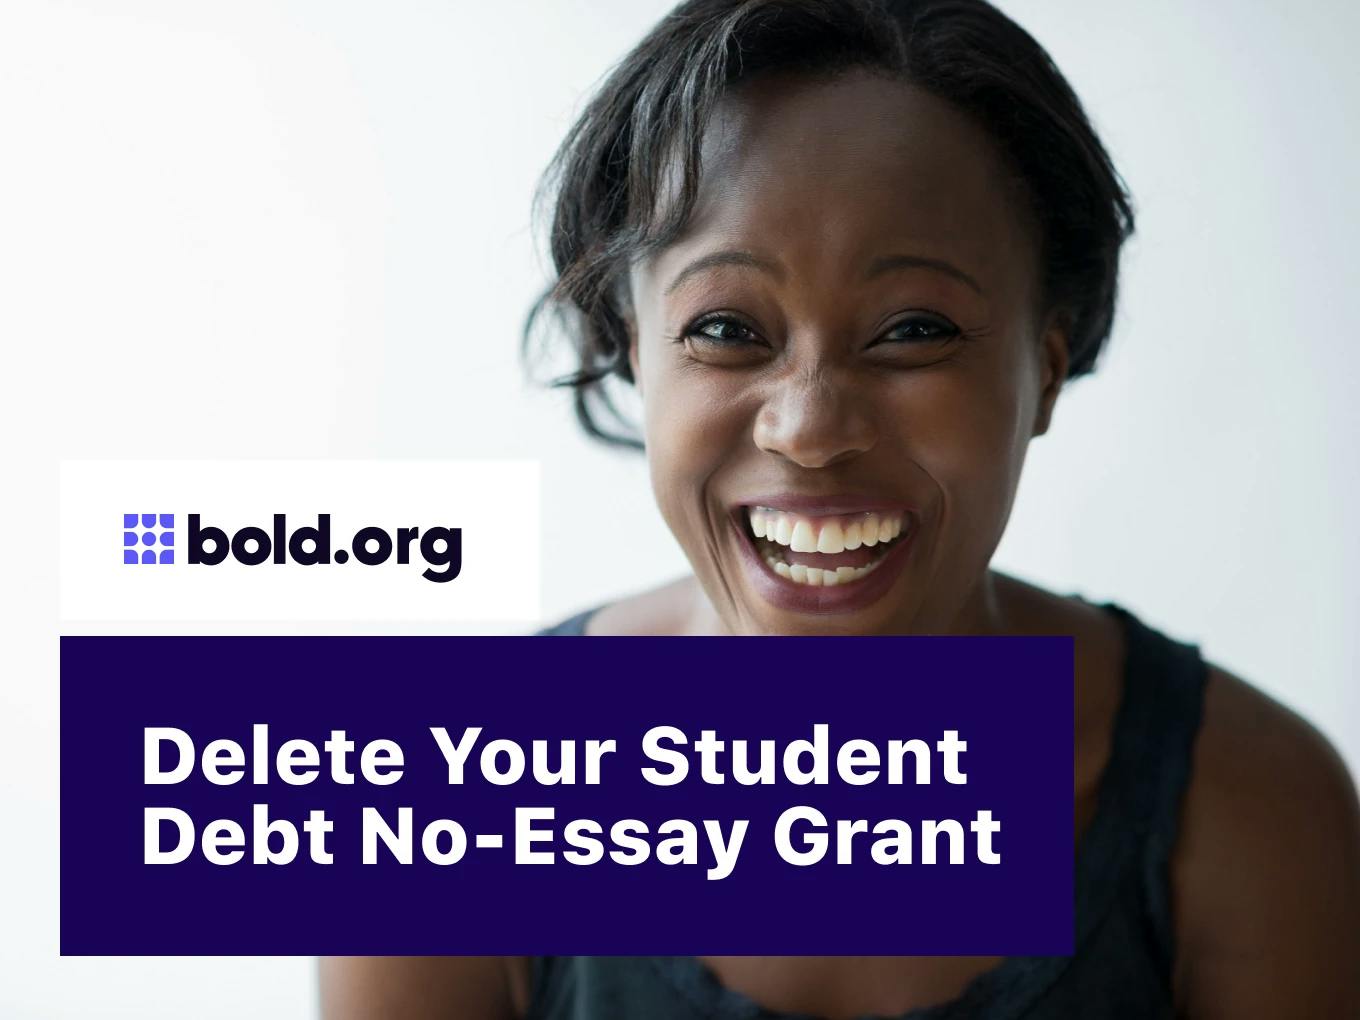 Forget Your Student Debt. No-Essay Grant.